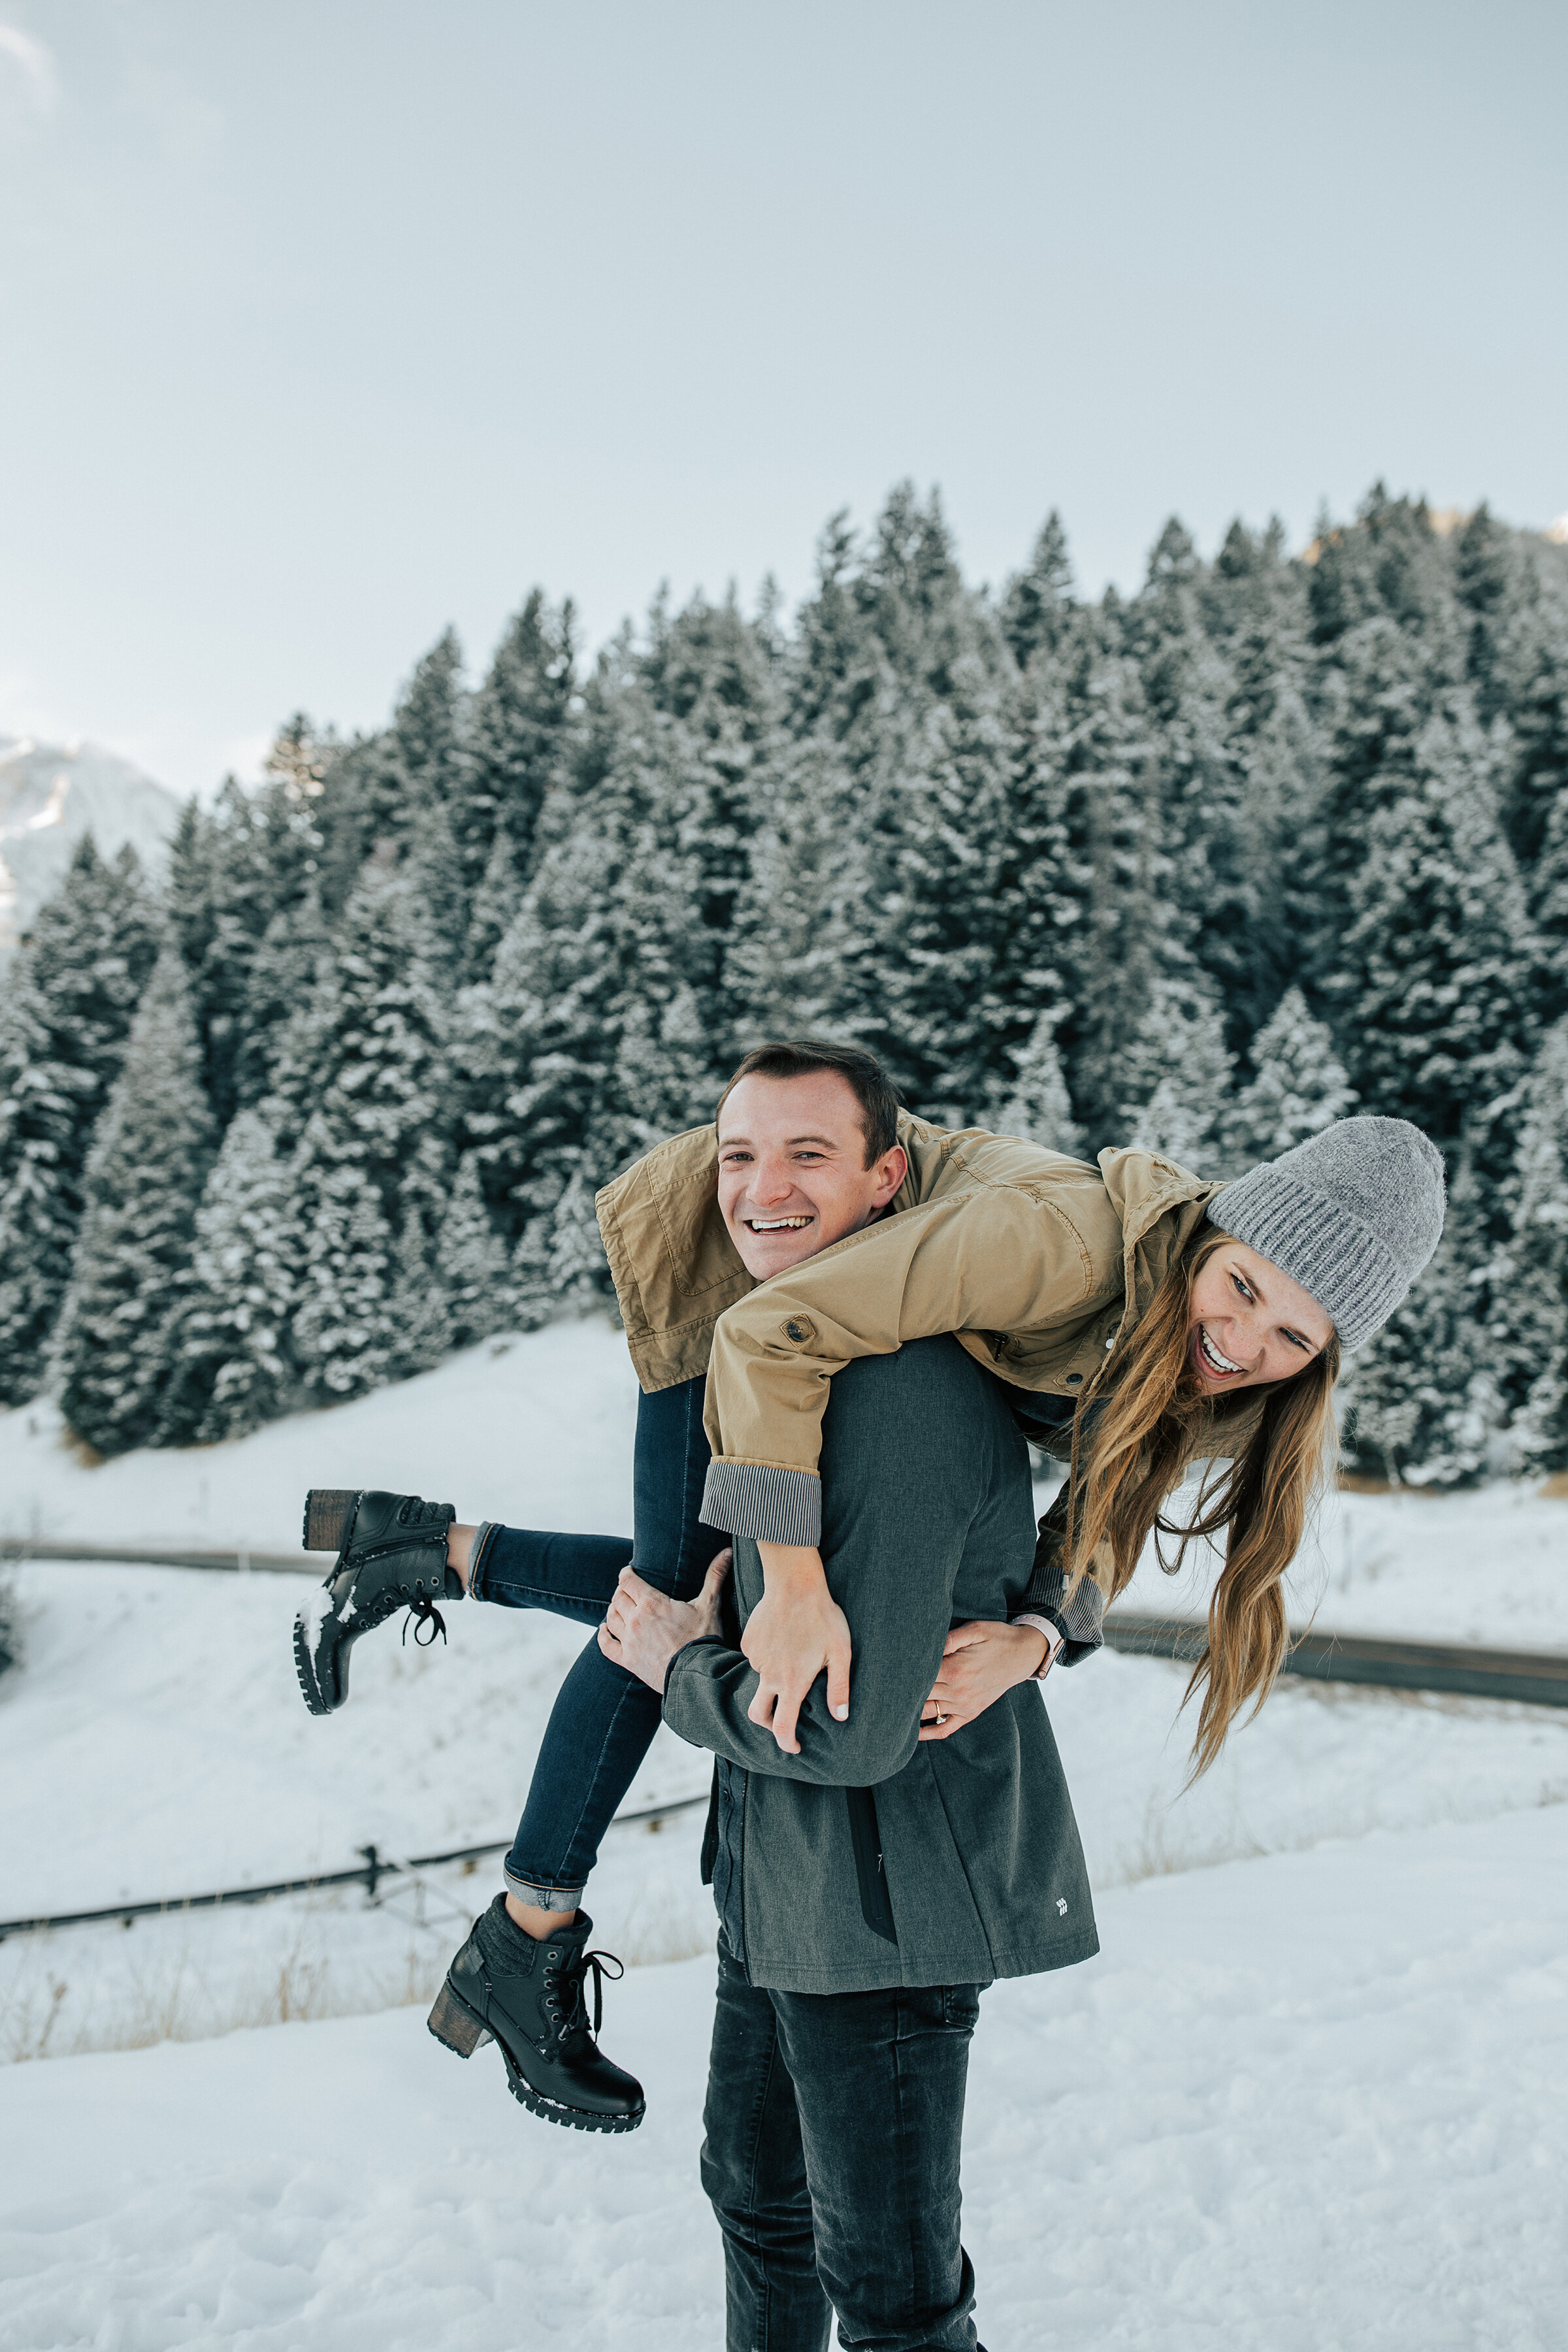  Playful couple wrestle in the snow in a snow covered engagement session by professional Utah photographer Emily Jenkins Photography. Winter engagement session inspiration ideas and goals snow covered trees winter engagement attire inspiration ideas 